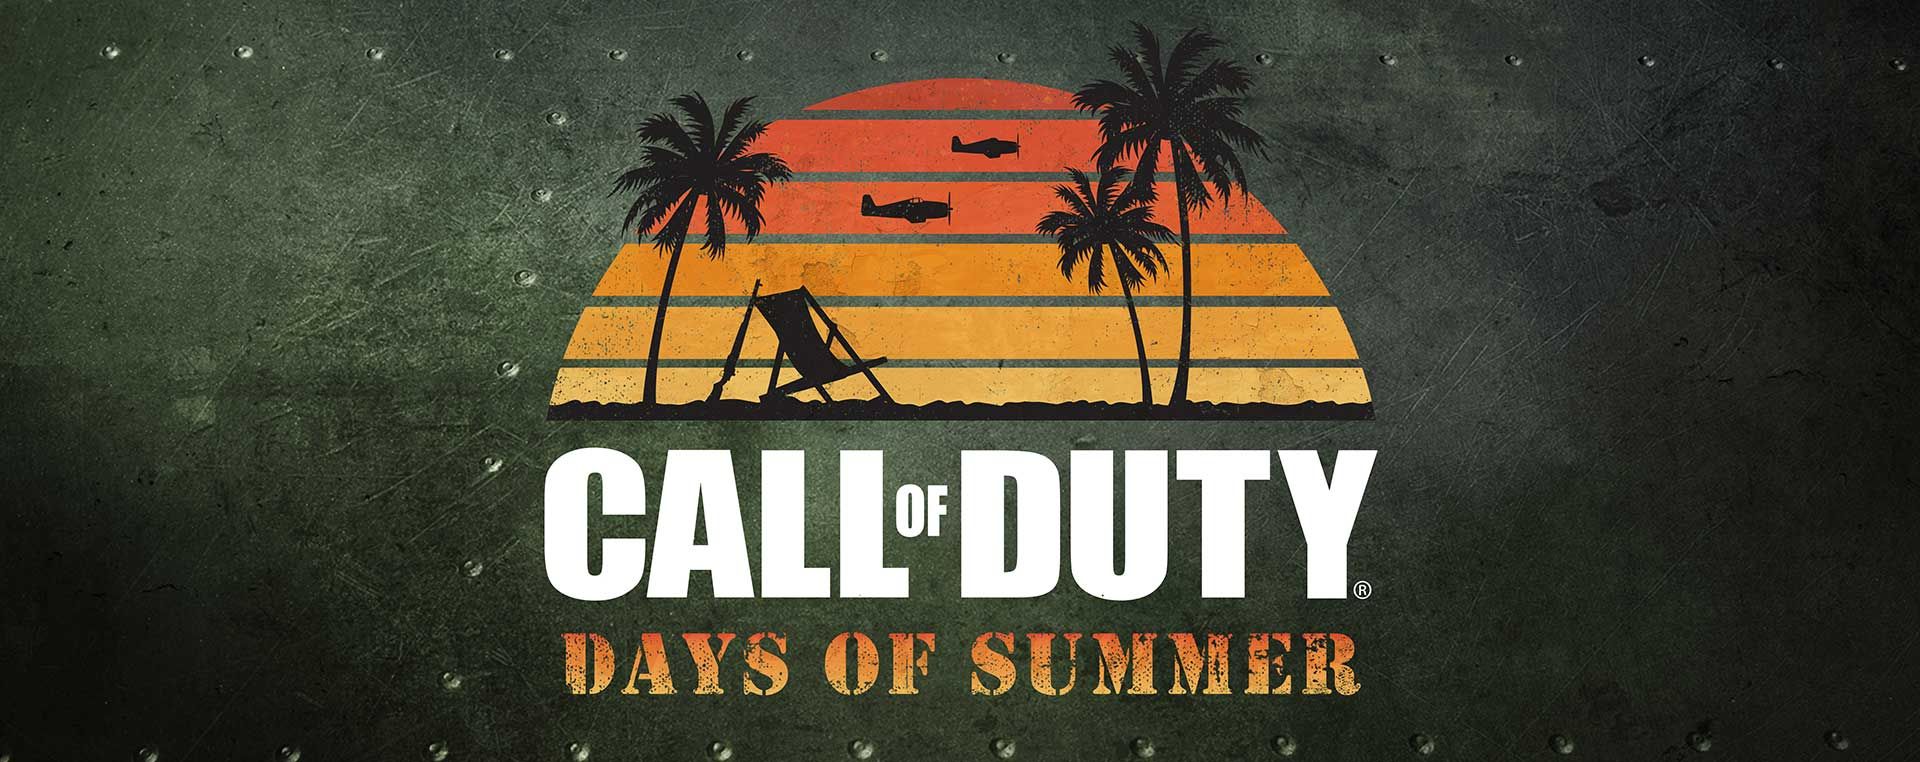 Call of Duty Days of Summer